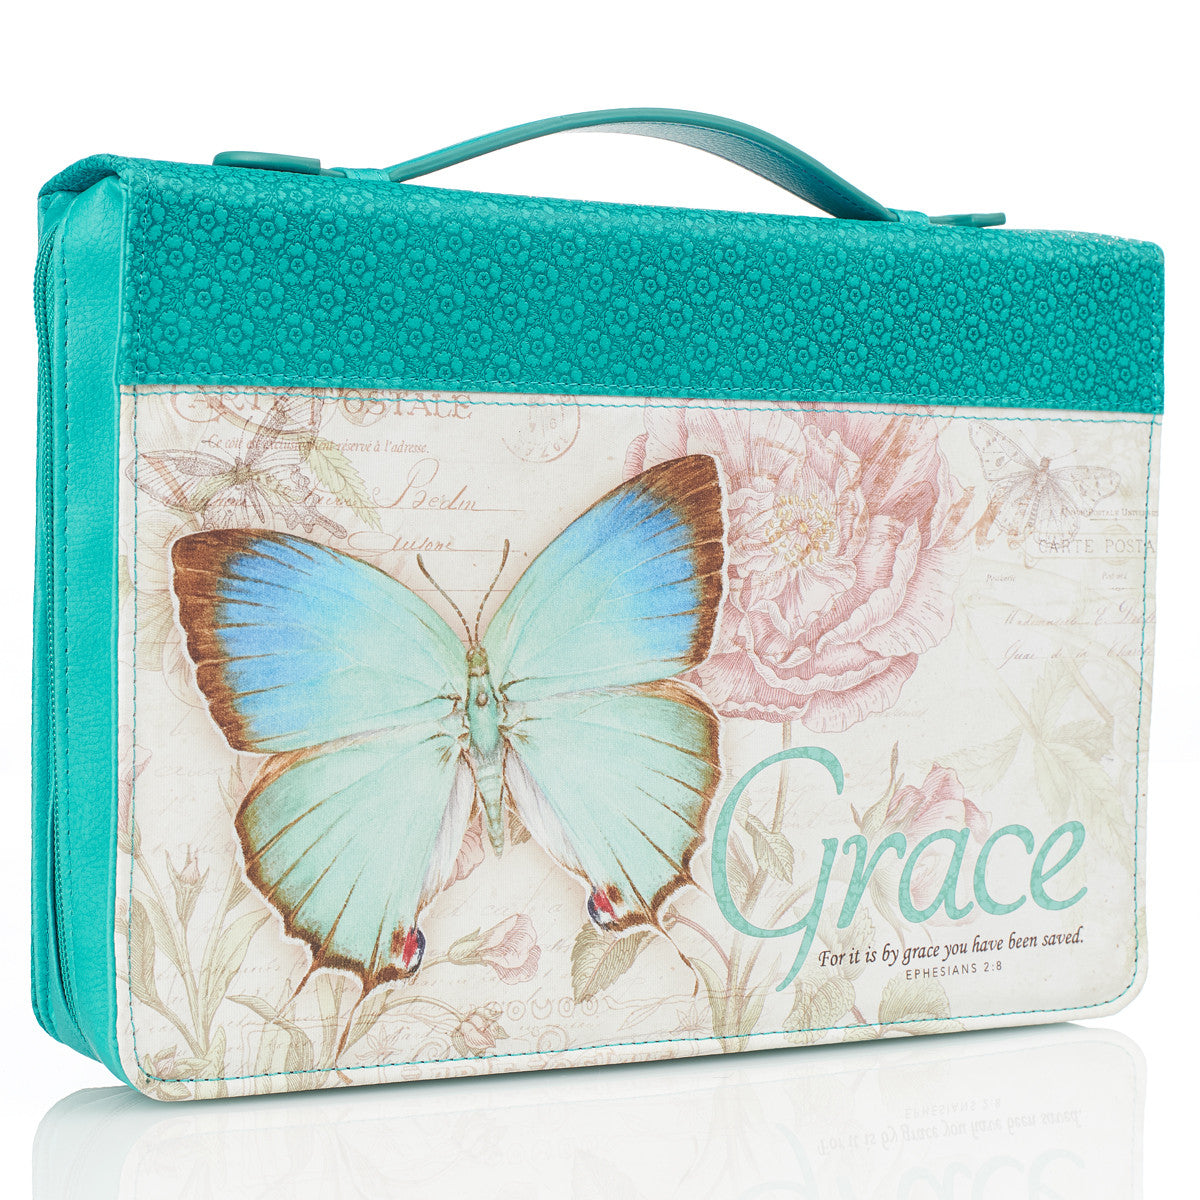 Grace Butterfly Blessings Teal Faux Leather Fashion Bible Cover